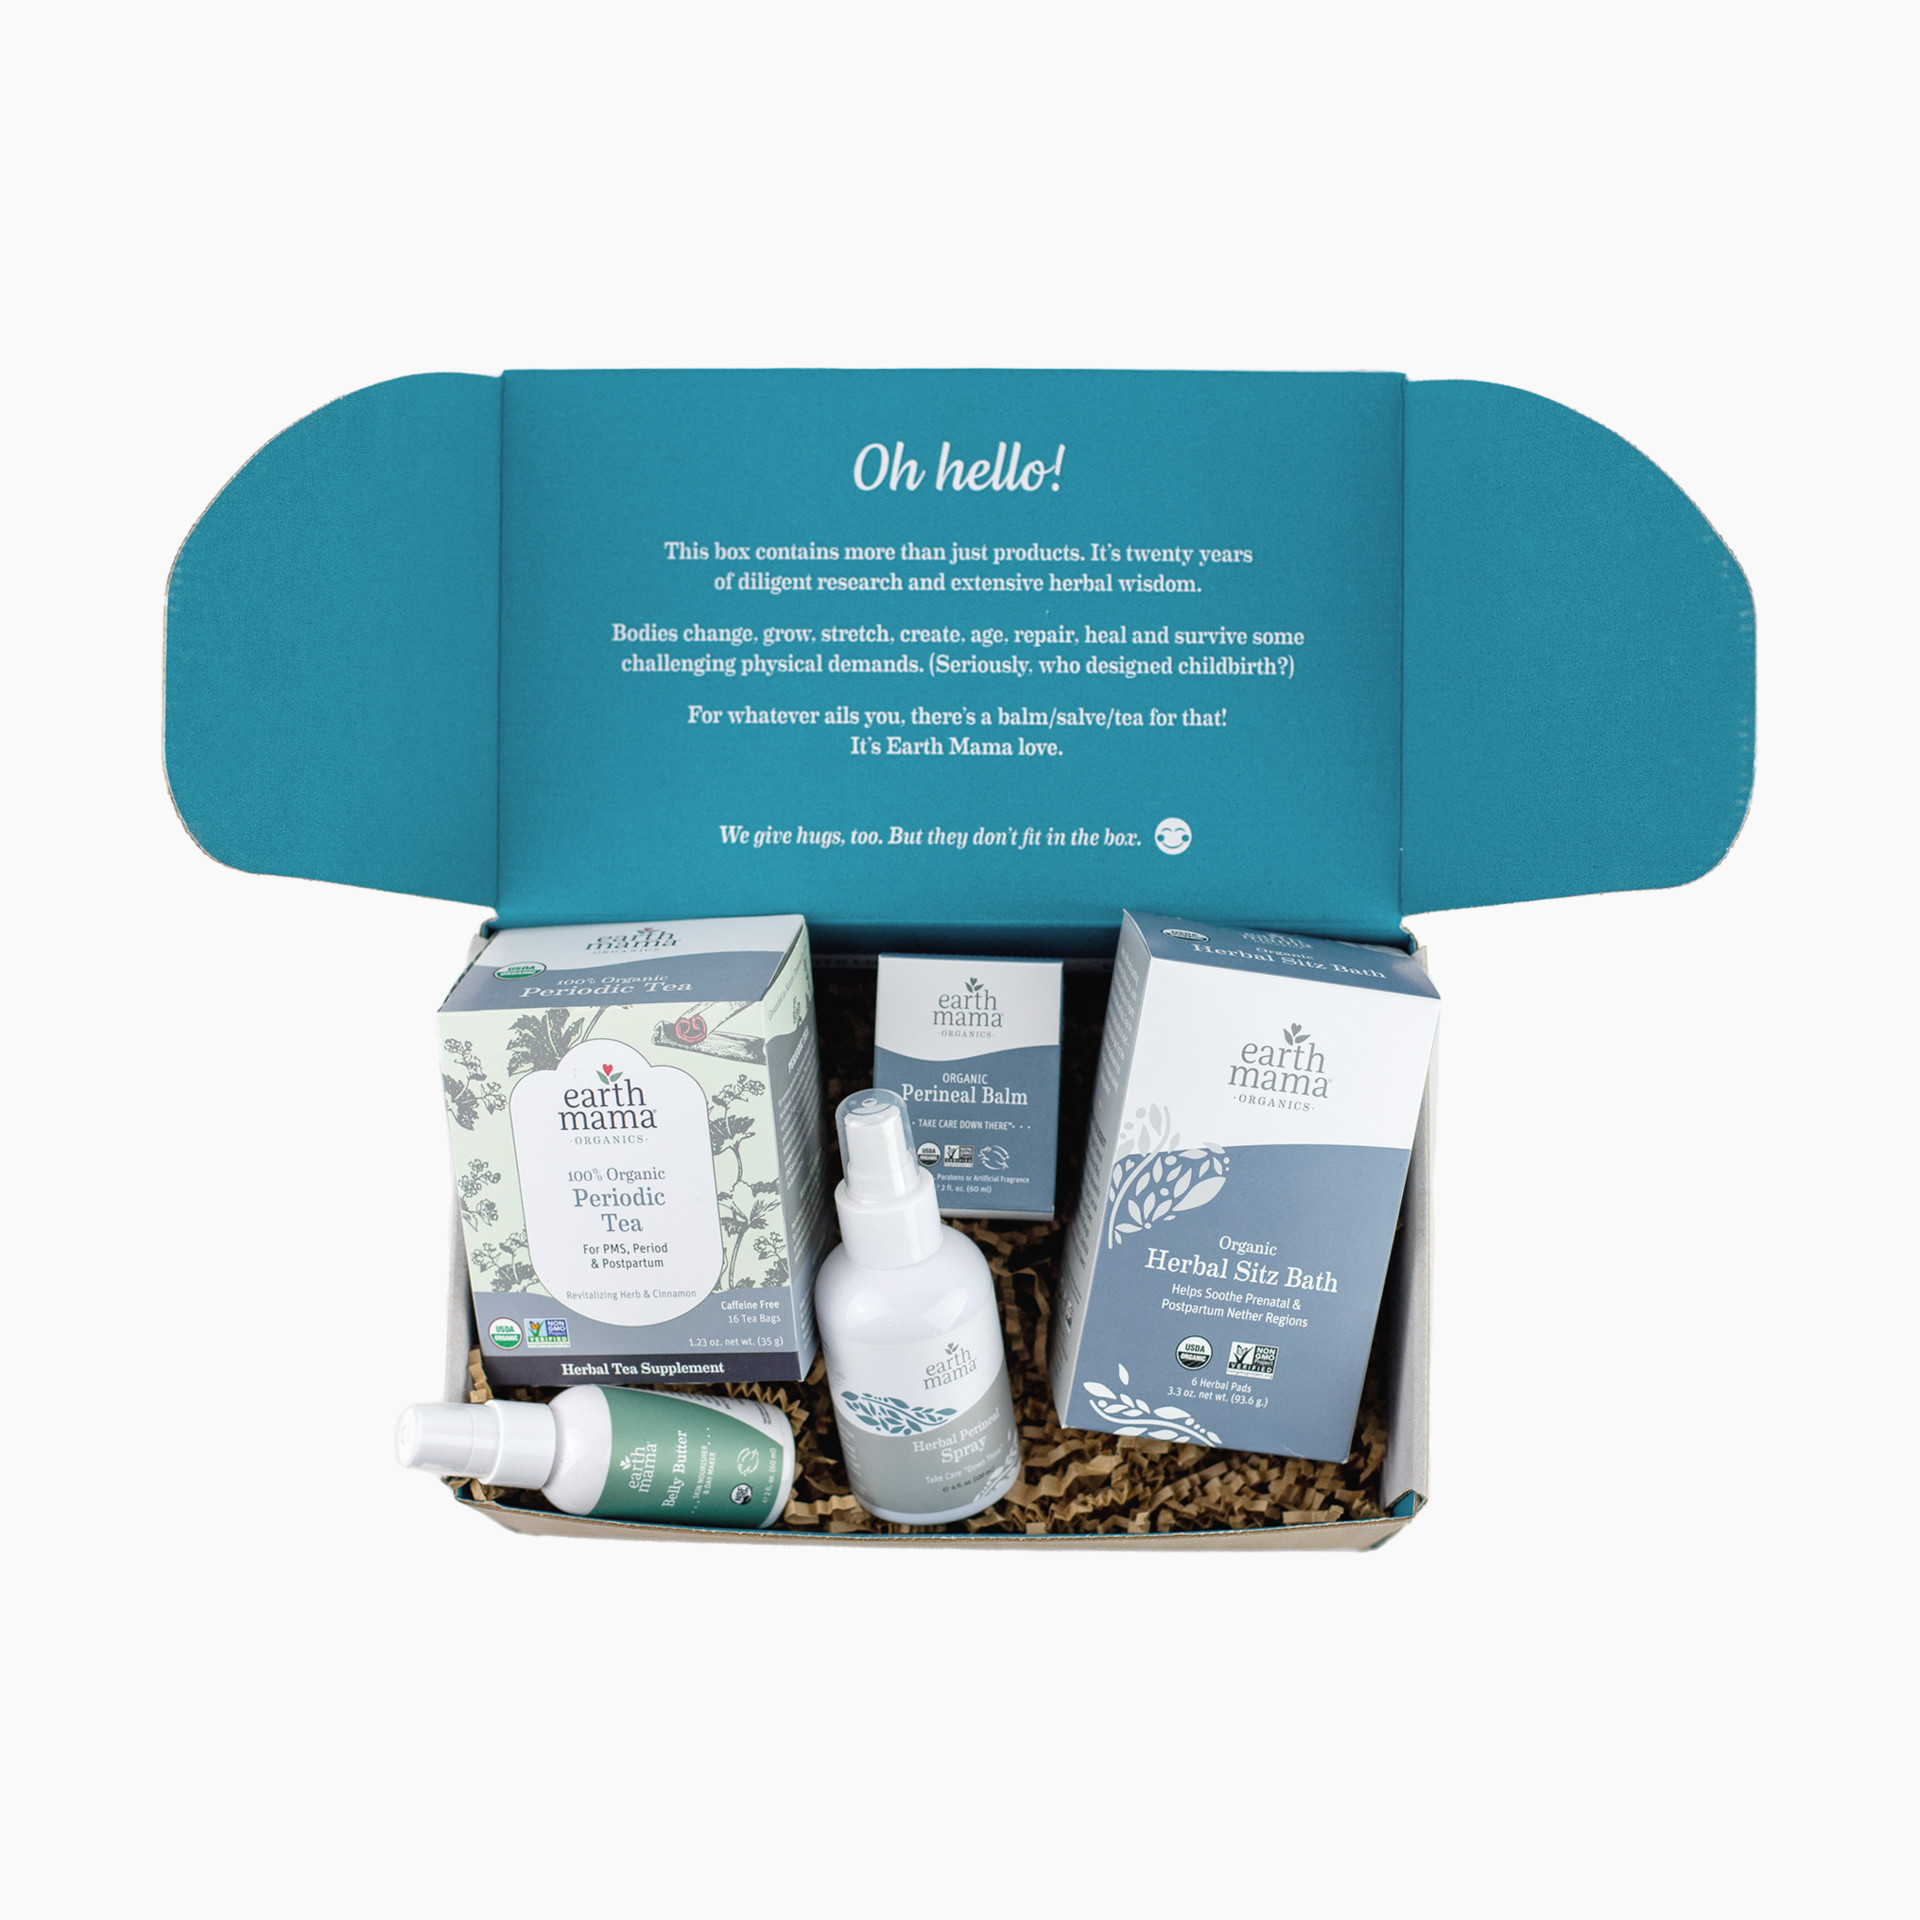 Frida Mom Labor and Delivery + Postpartum Recovery Kit - In His Hands Birth  Supply